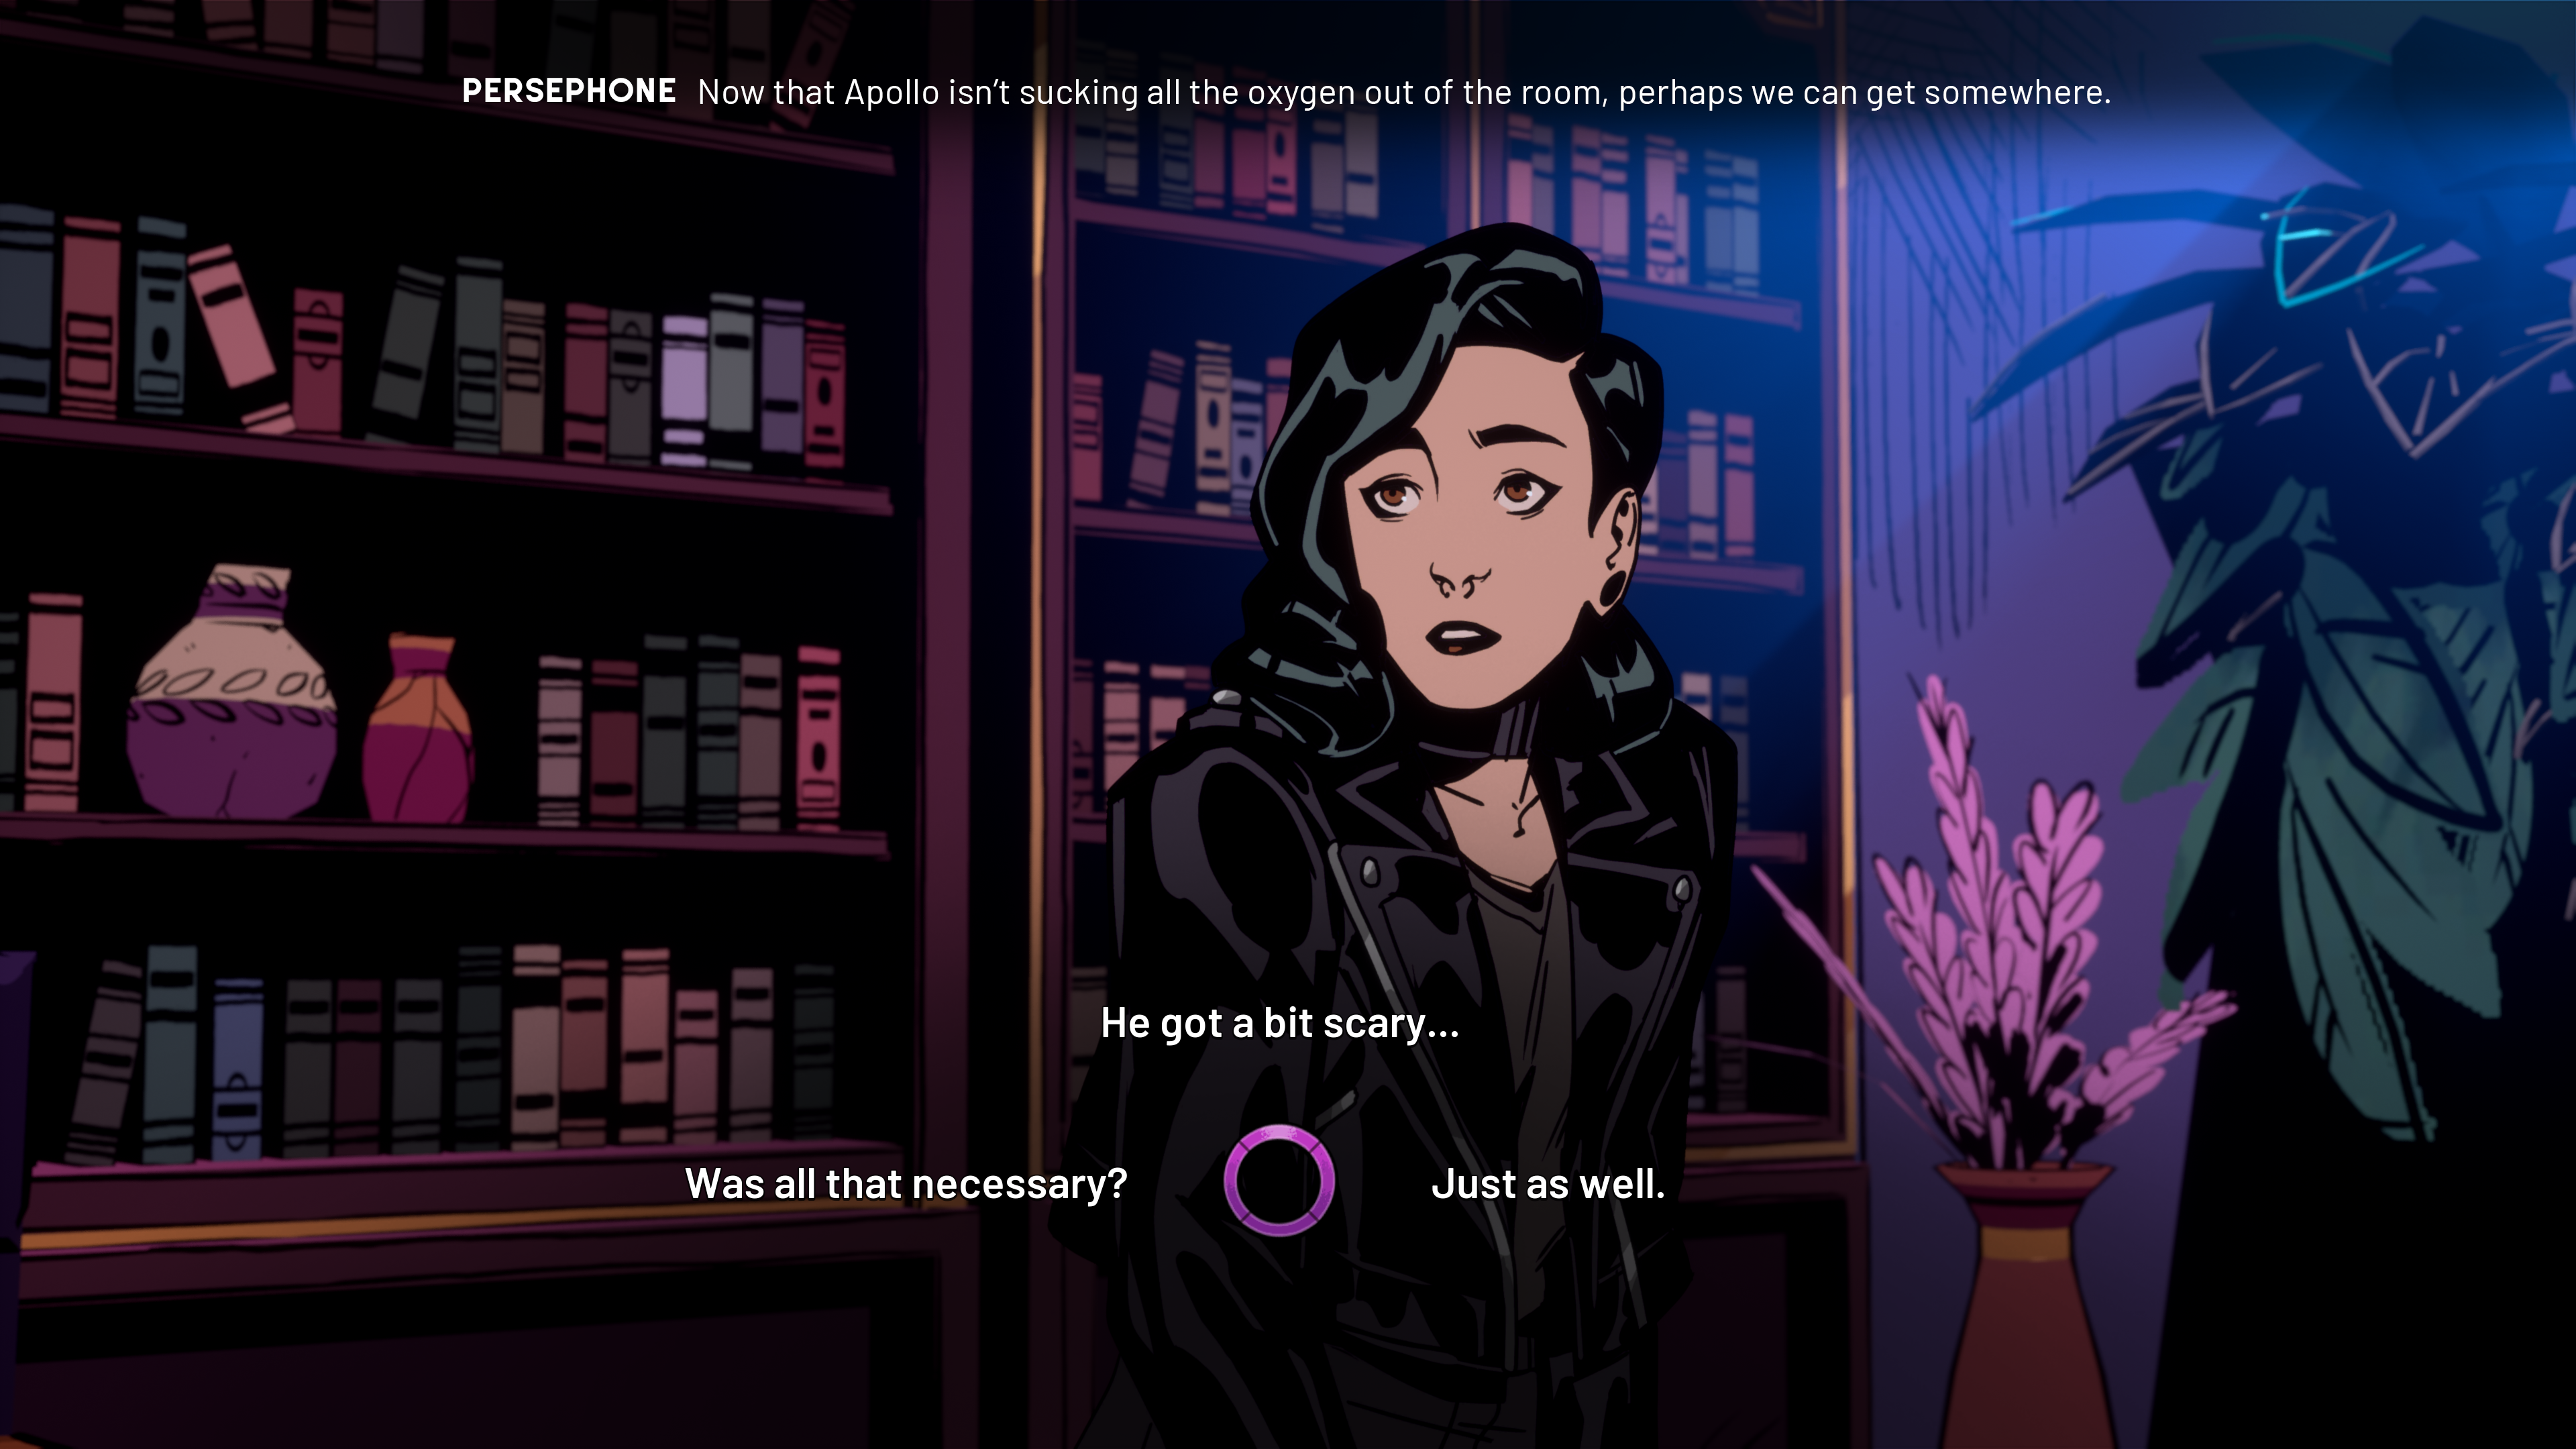 Grace, the protagonist of Stray Gods is sitting on the edge of a desk. She is wearing a black leather jacket, her hair is loose, and she is looking past the camera at Persephone, who is out of frame. There are bookshelves behind her, with some vases and flowers visible. A purple chair is visible. Persephone is speaking, with the subtitle reading “Now that Apollo isn’t sucking all the oxygen out of the room, perhaps we can get somewhere.” The work in progress dialogue wheel at the bottom has three options. To the left it reads ‘Was all that necessary.’ To the right it reads ‘Just as well?’ and the top option reads ‘He got a bit scary…’.